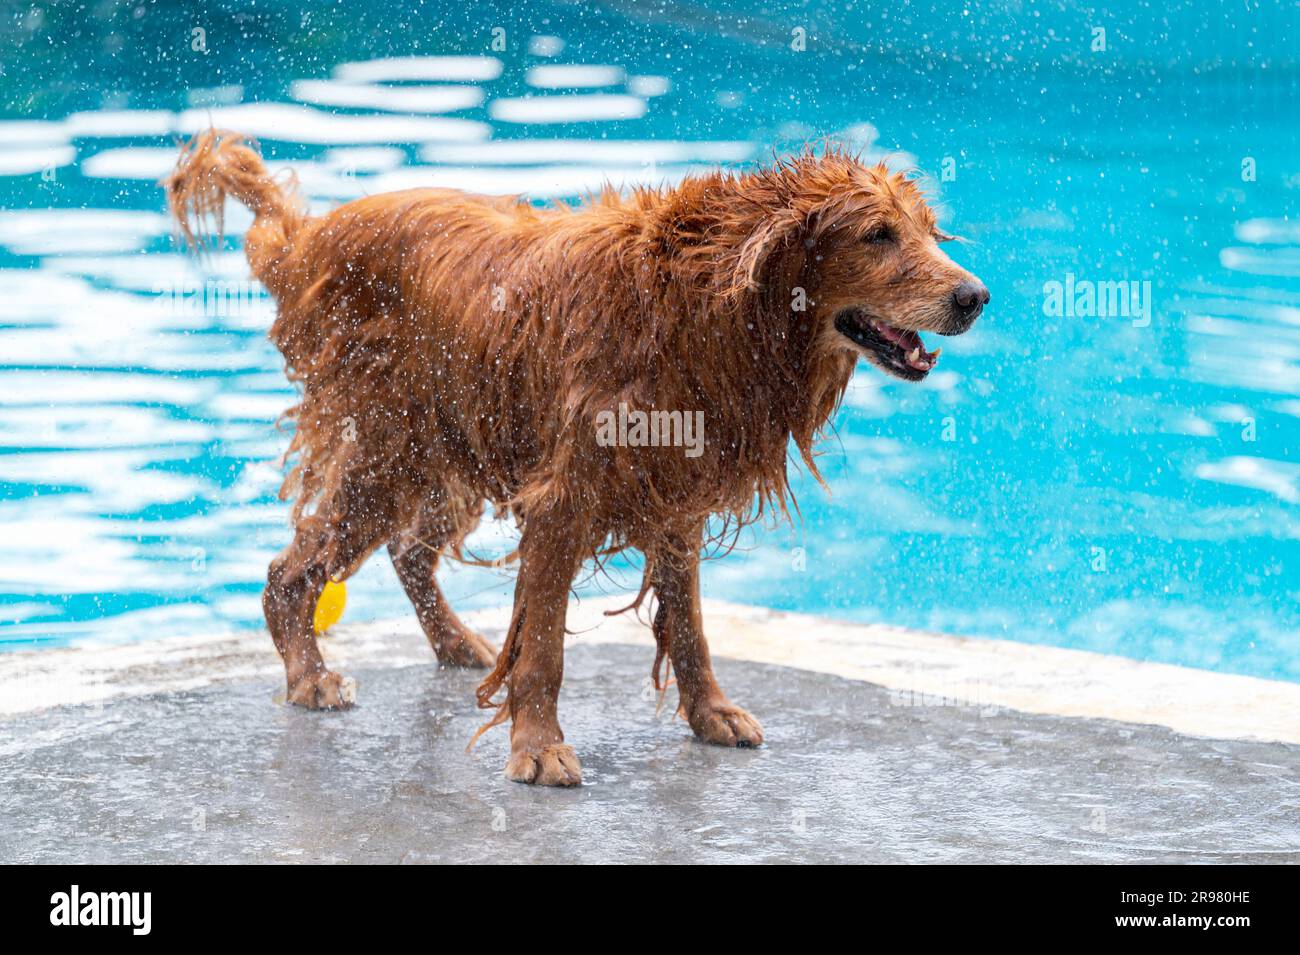 Wet golden retriever flicking water by the pool Stock Photo